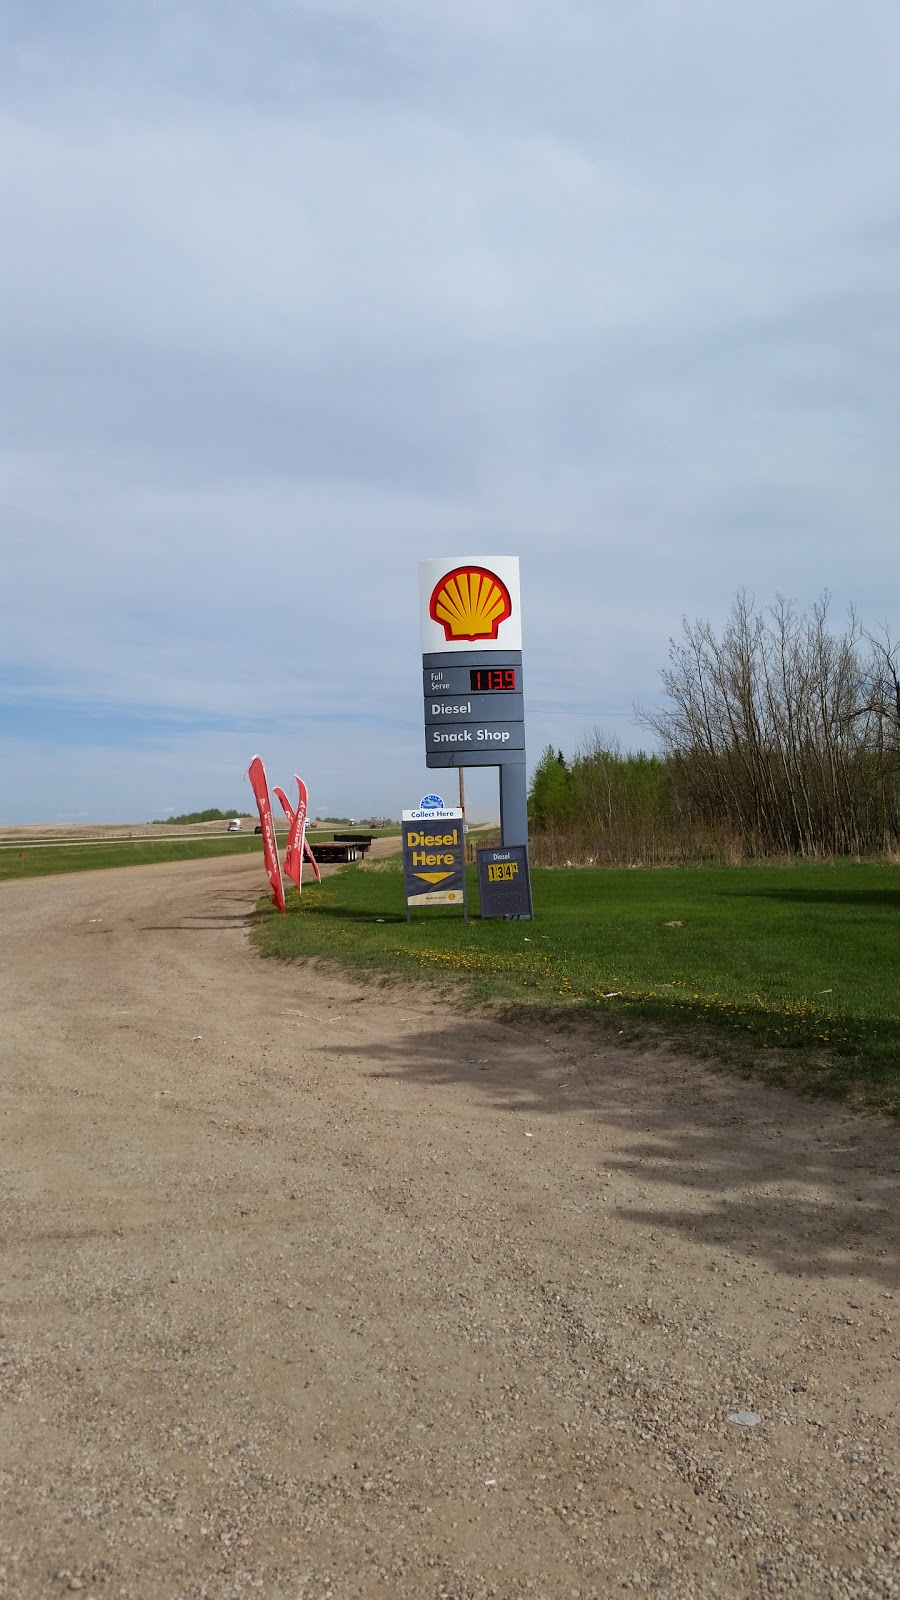 Shell | convenience store | Yellowhead Hwy Hwy, 16 W, Wabamun, AB T0E 2K0, Canada | 7808924600 OR +1 780-892-4600